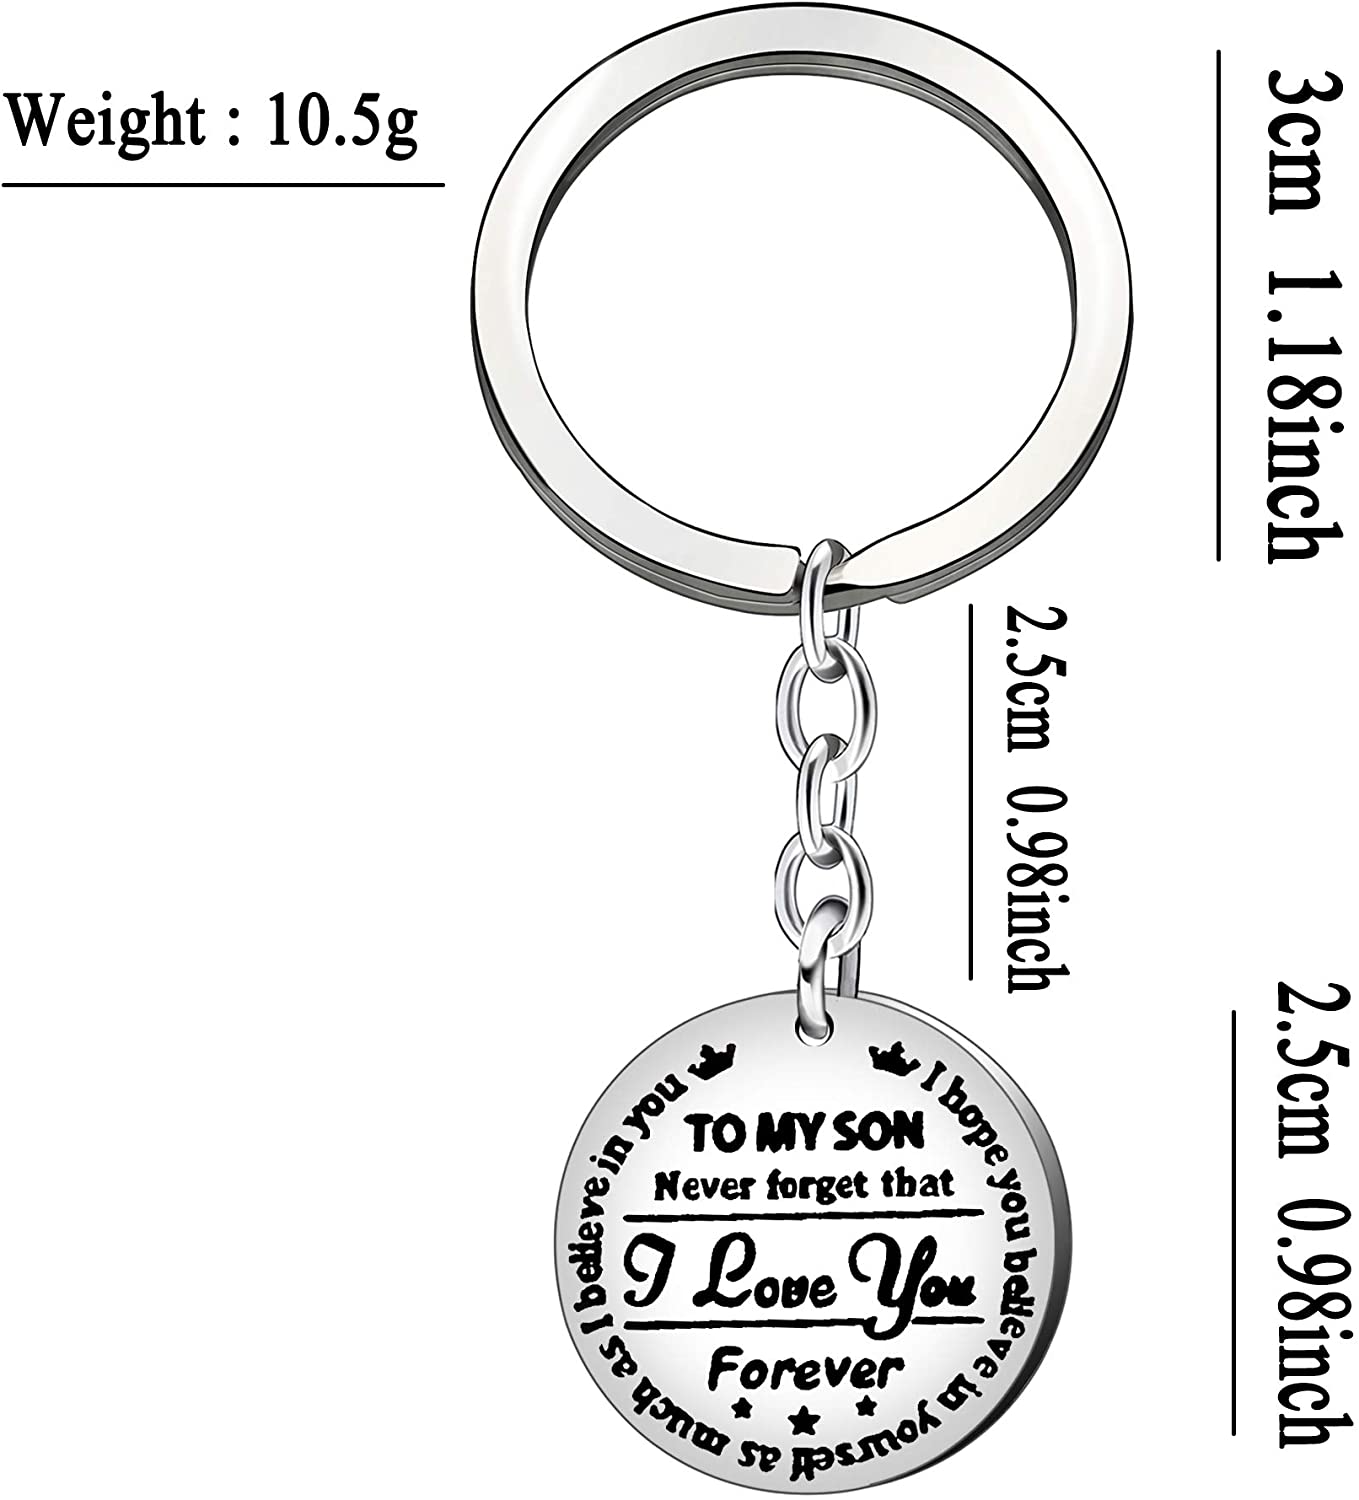 YONGHUI Stainless Steel Mens Key Chain Keyrings for Son Never Forget That I Love You Forever Silver